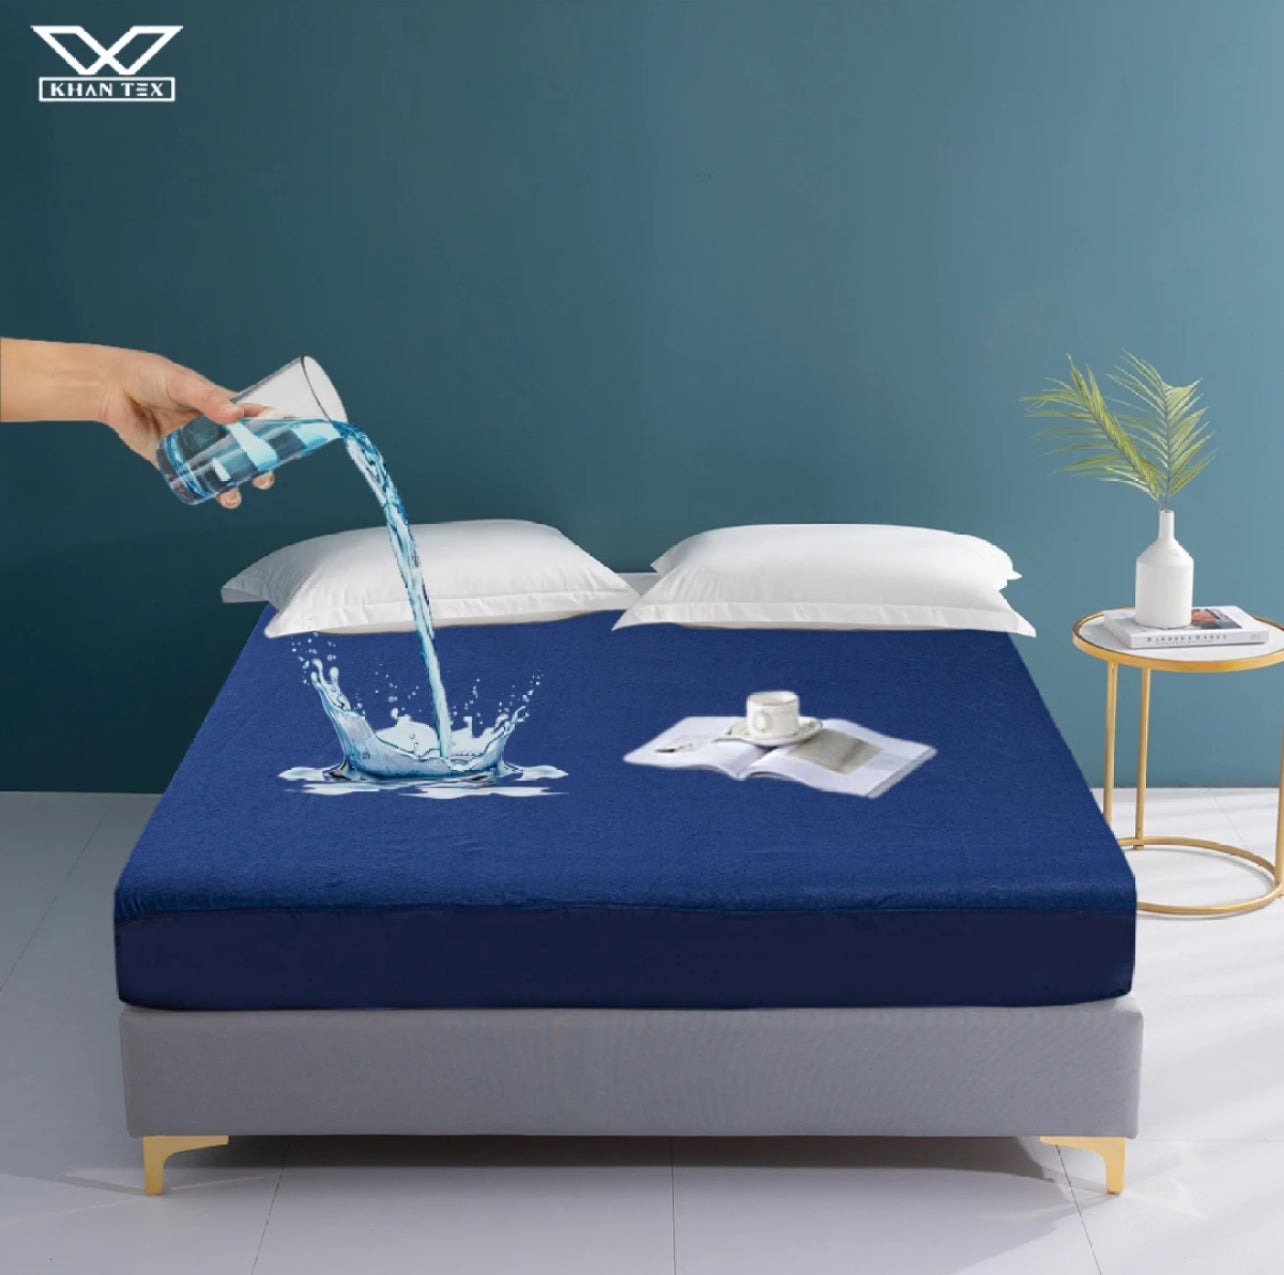 Premium Quality Waterproof Mattress Cover For Double Bed King Size